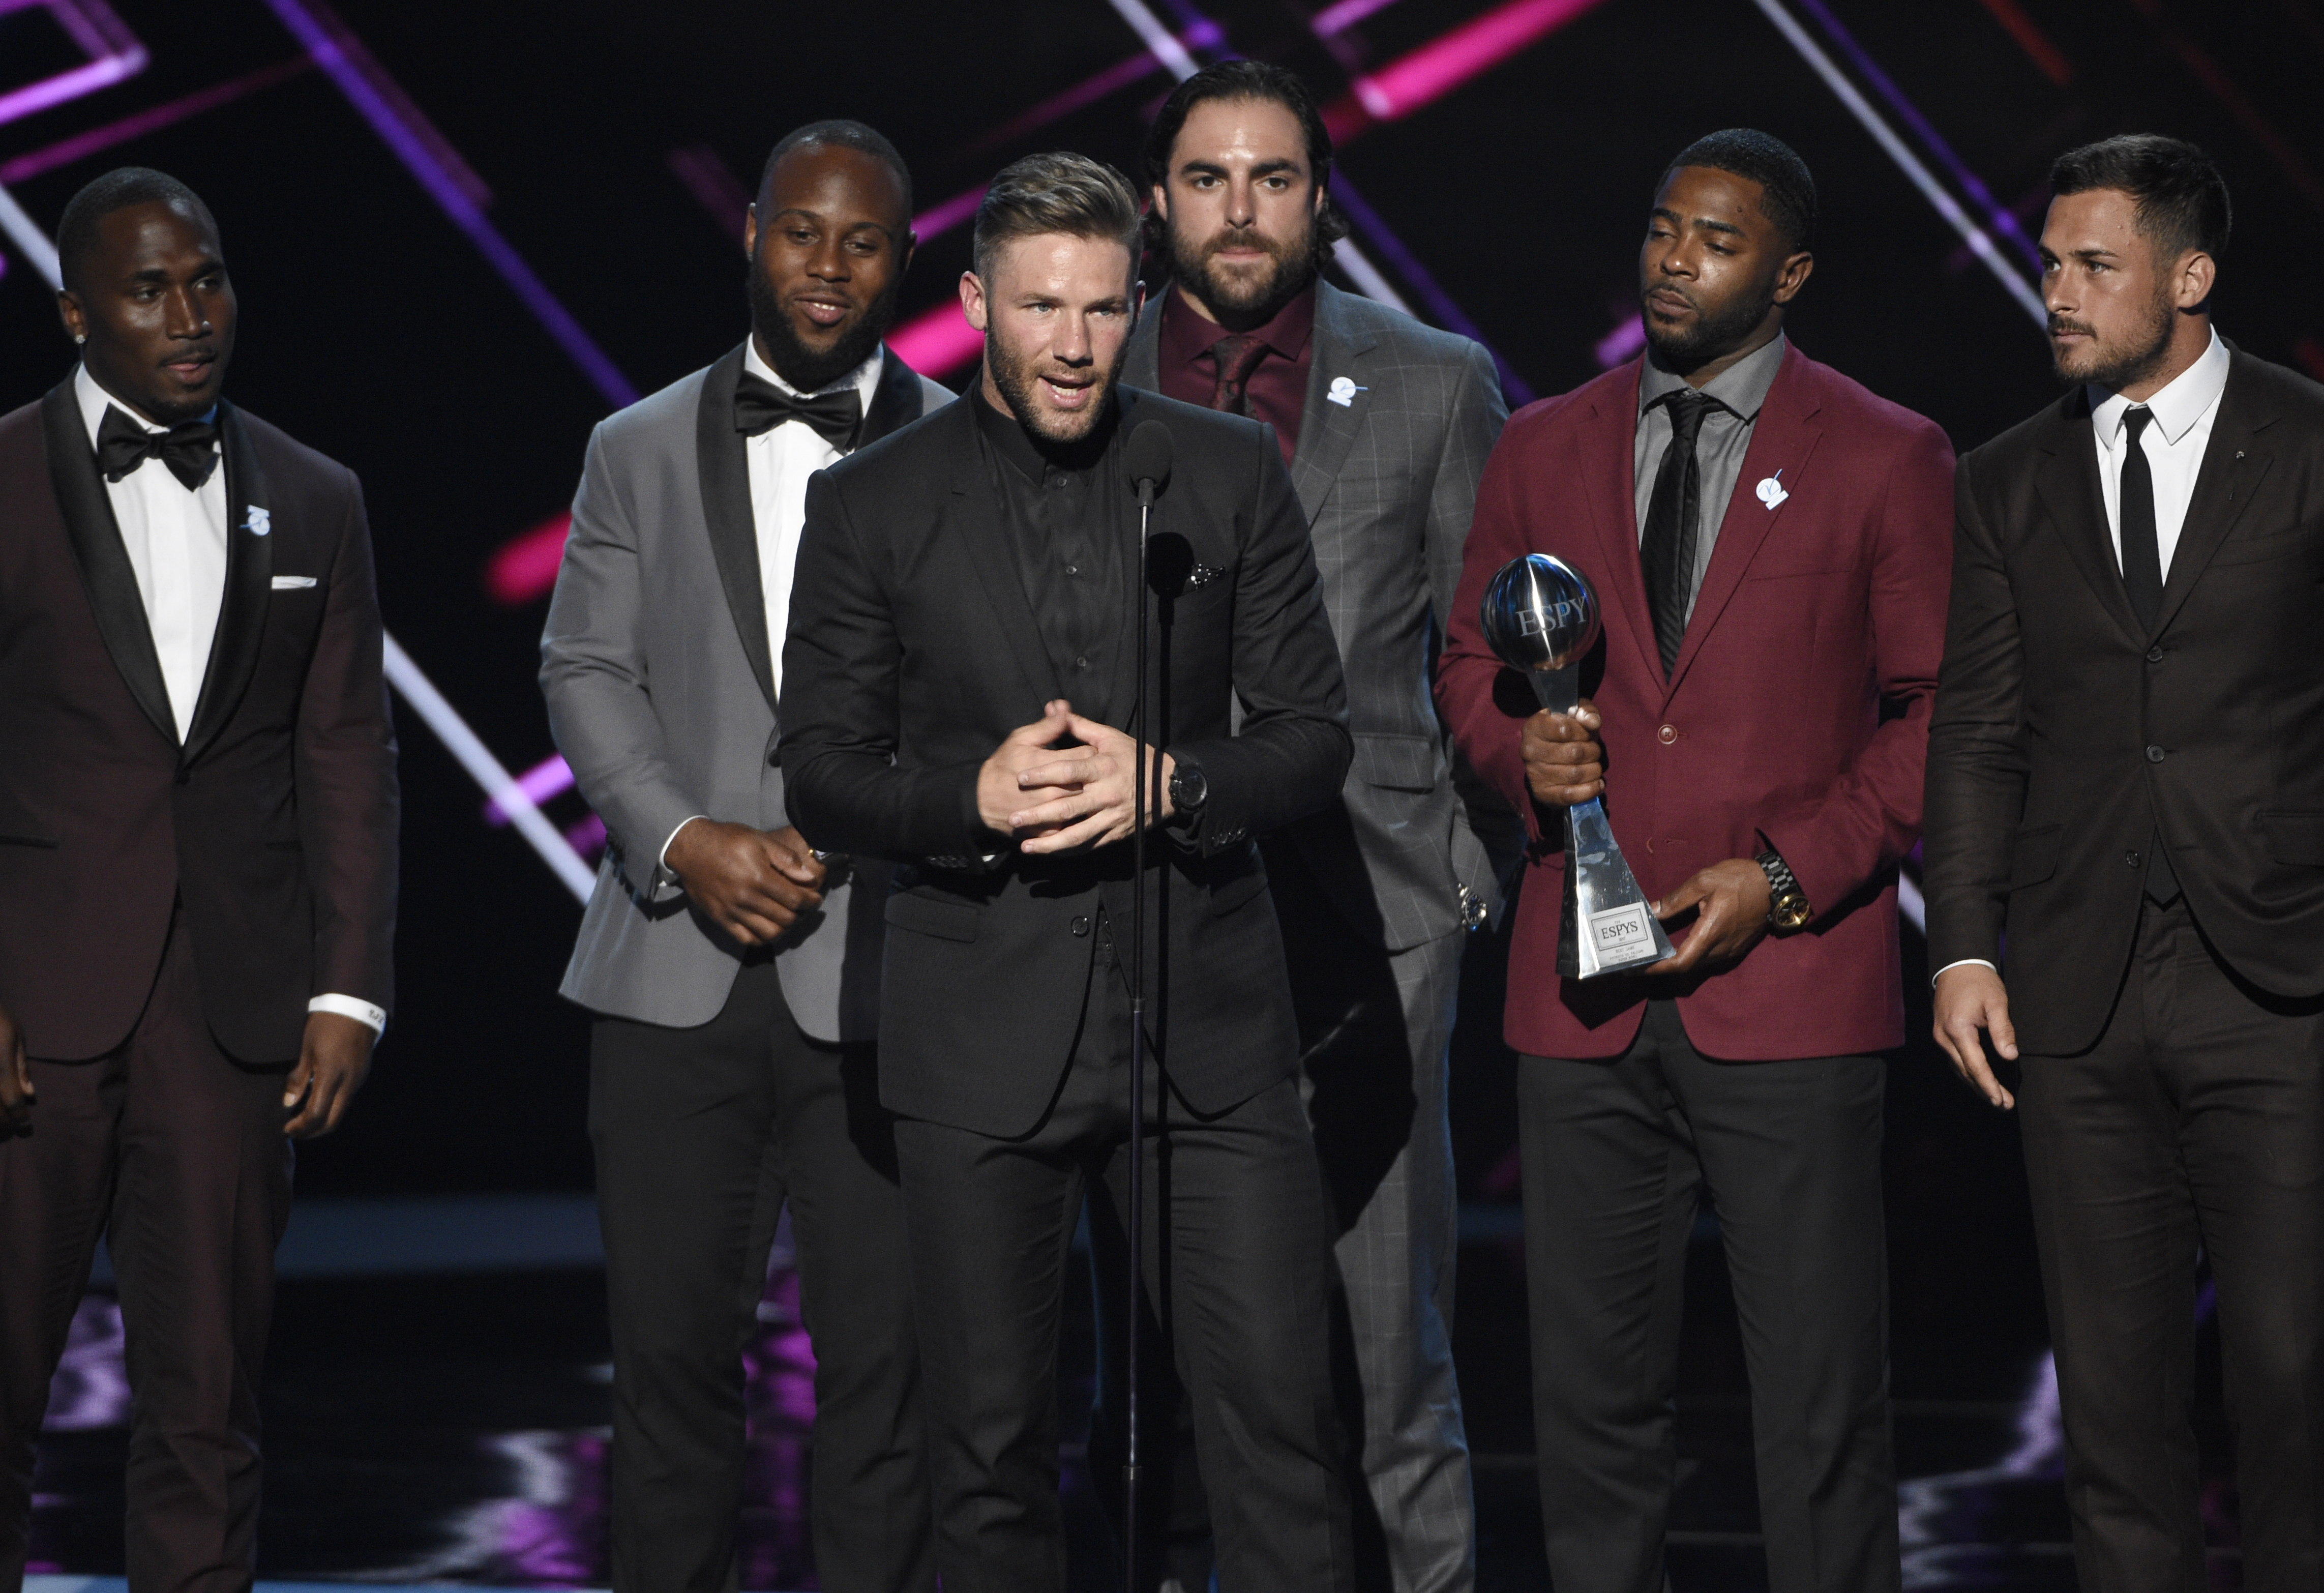 NFL football player Julian Edelman, of the New England Patriots, accepts the award for best game at Super Bowl LI at the ESPYS at the Microsoft Theater on Wednesday, July 12, 2017, in Los Angeles. Pictured from left, Dion Lewis, James White, Nate Ebner, Malcolm Butler and Danny Amendola. (Photo by Chris Pizzello/Invision/AP)